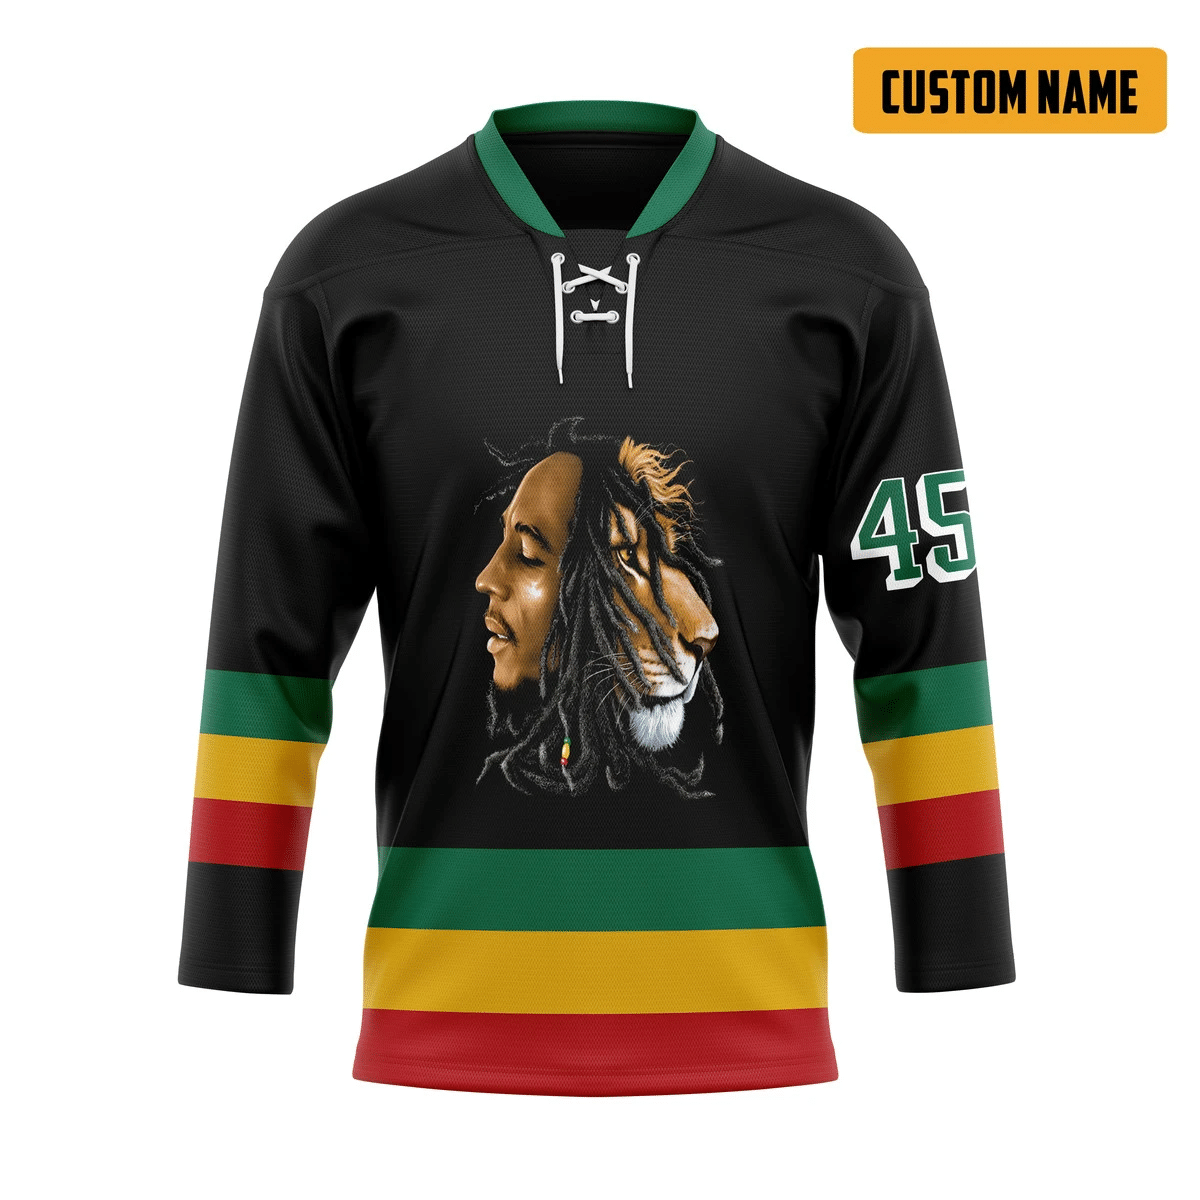 Top cool Hockey jersey for fan You can buy online. 165